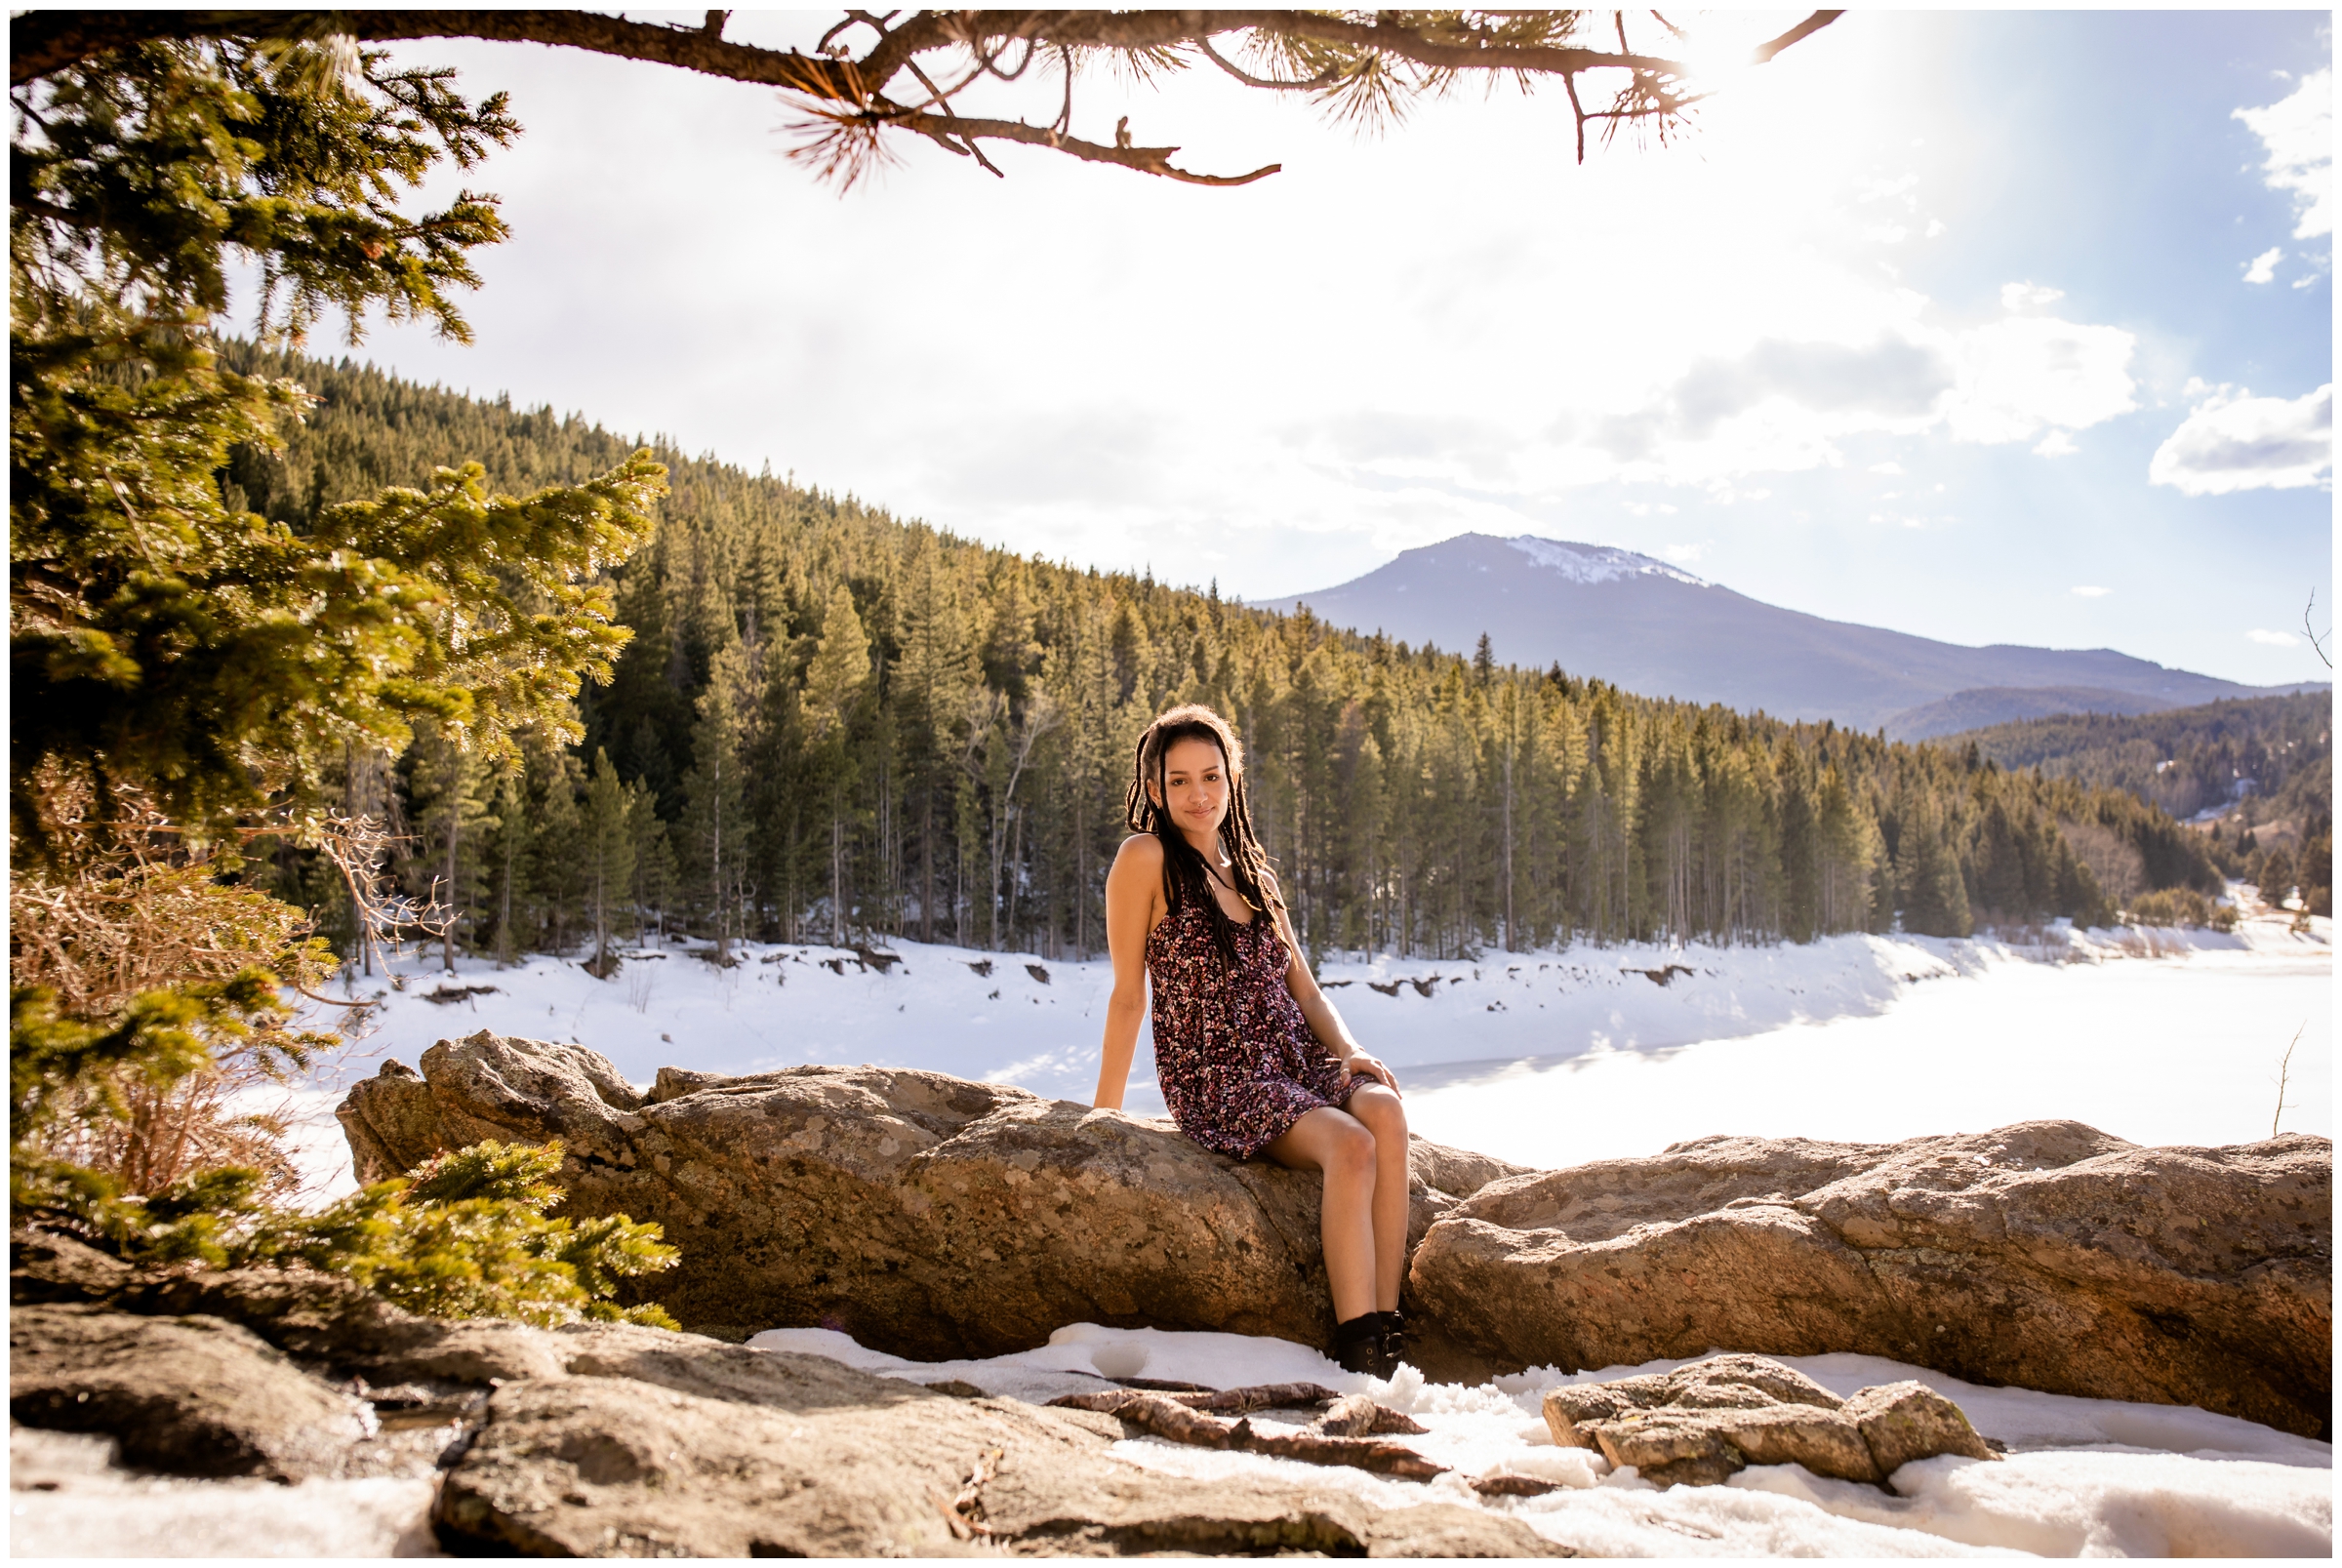 Senior pictures in Colorado mountains by Evergreen portrait photographer Plum Pretty Photography